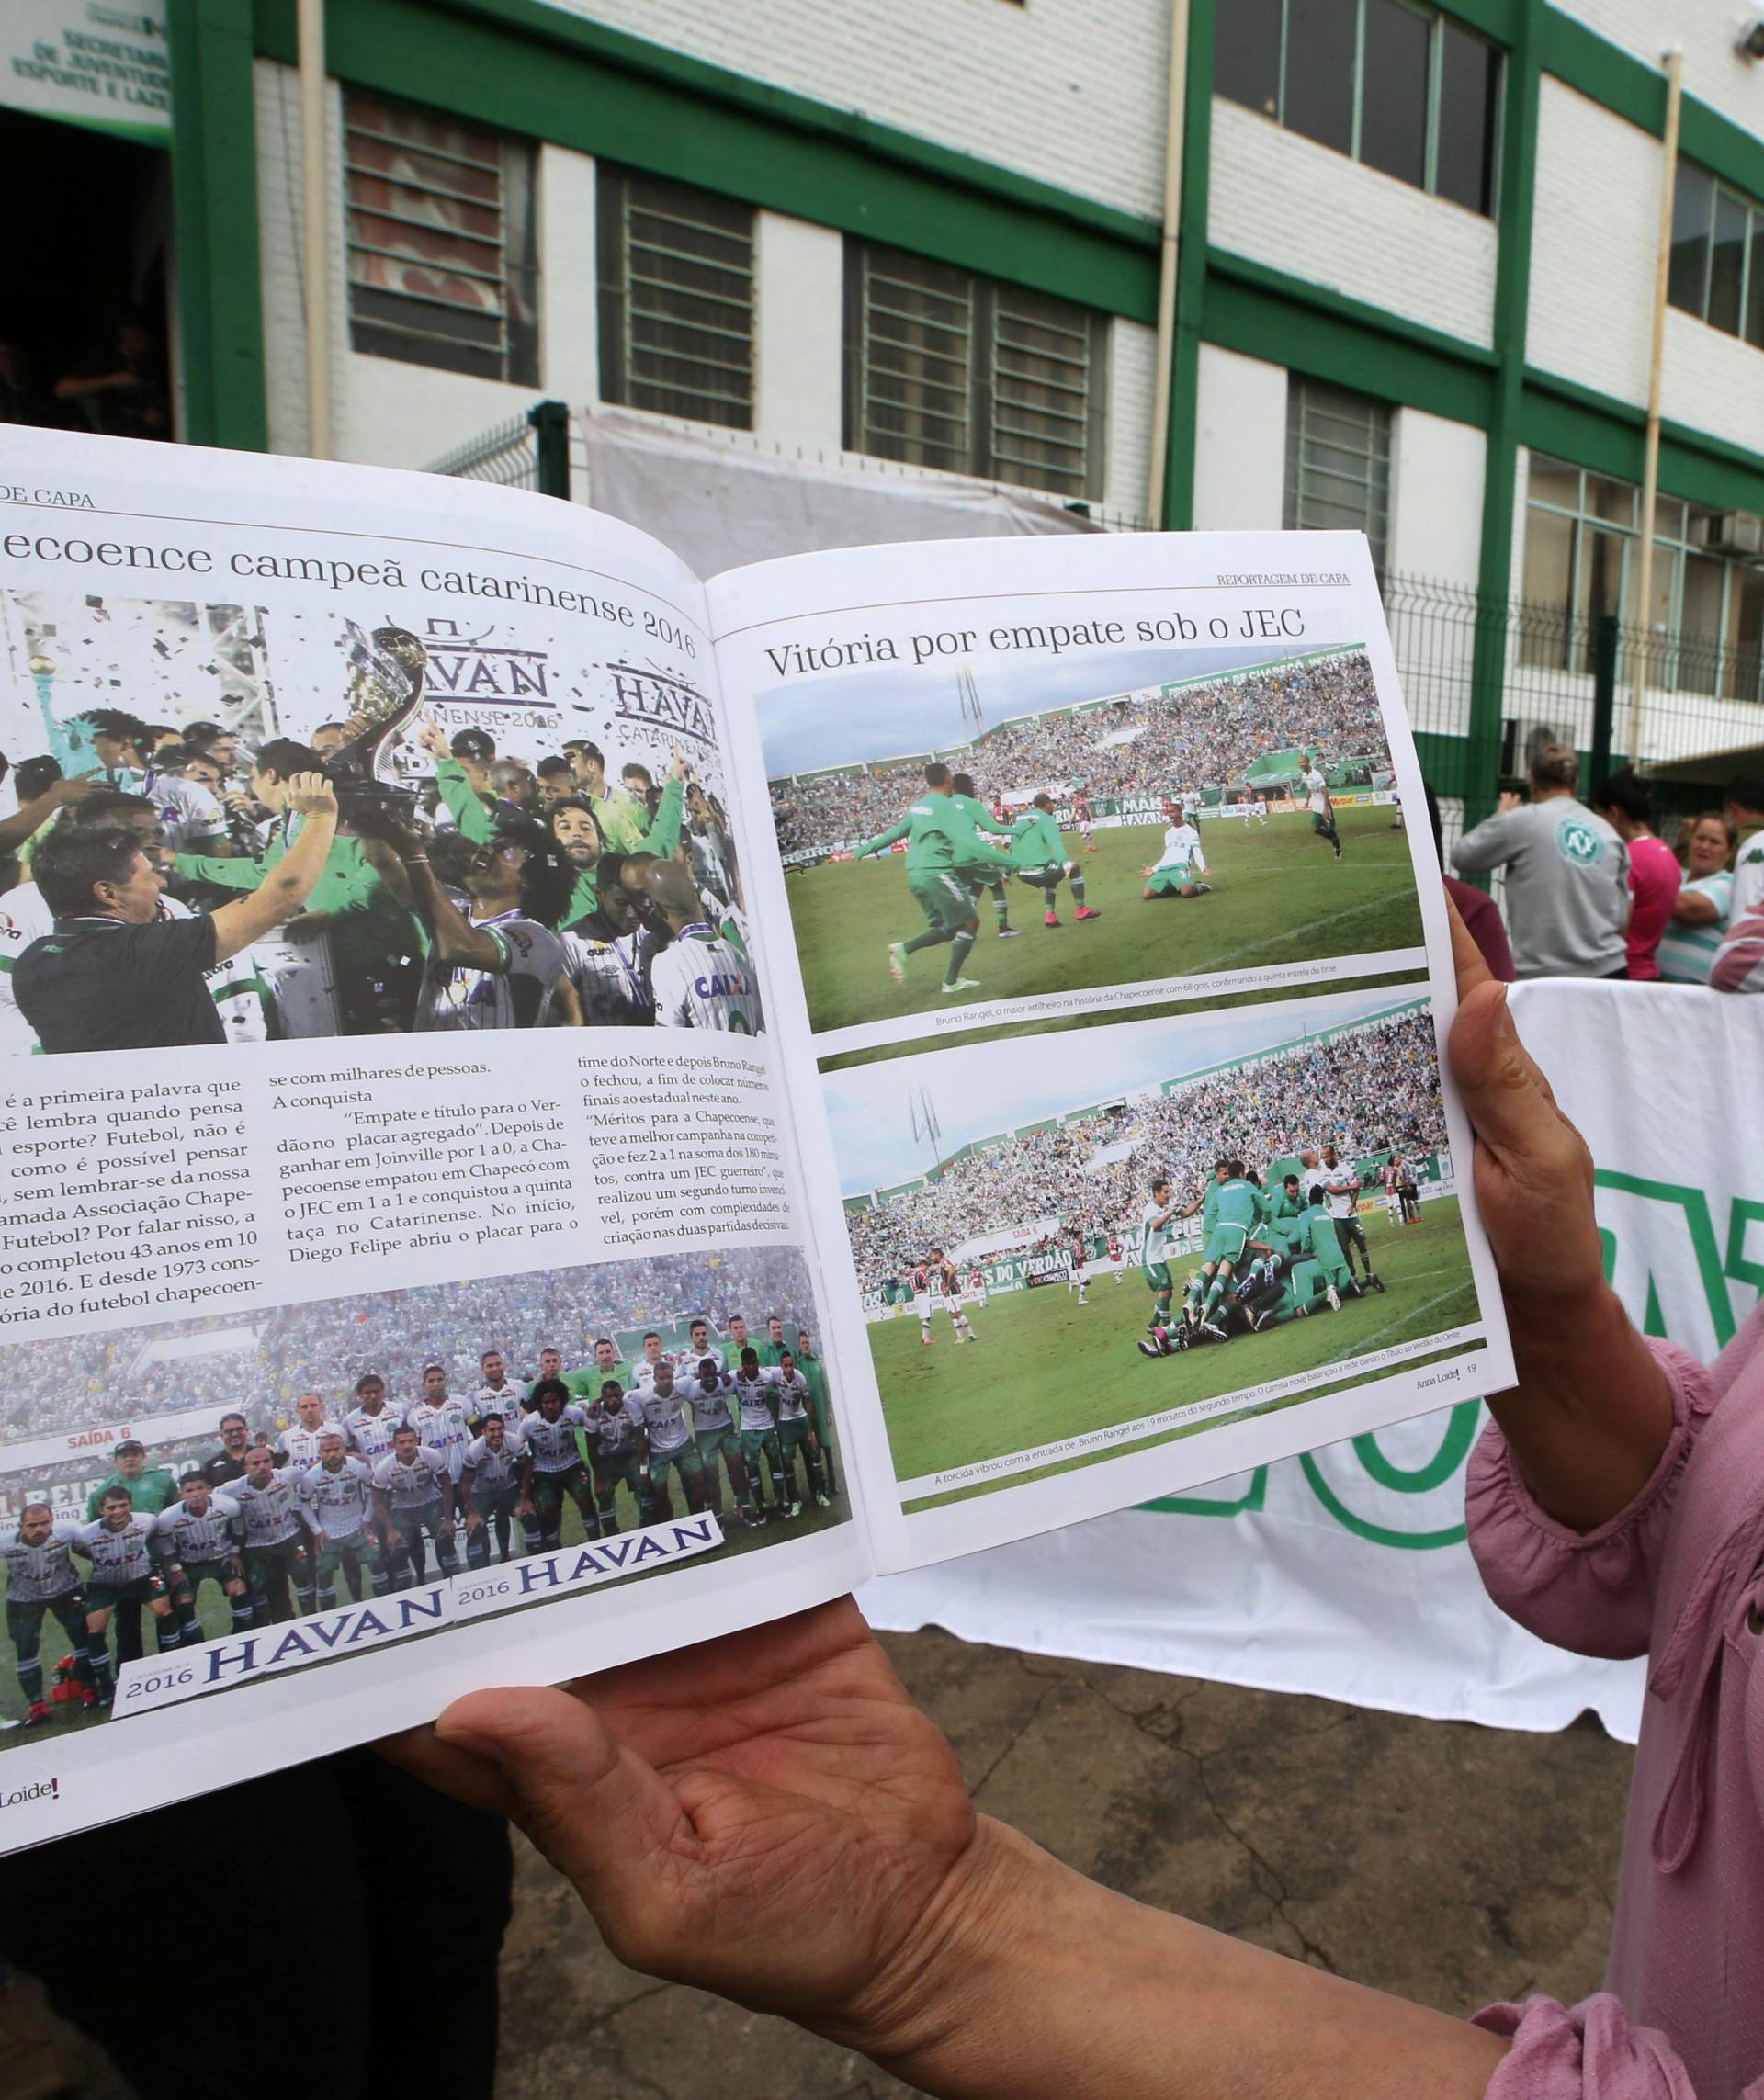 A fan of Chapecoense soccer team shows a magazine of the team in front of the Arena Conda stadium in Chapeco